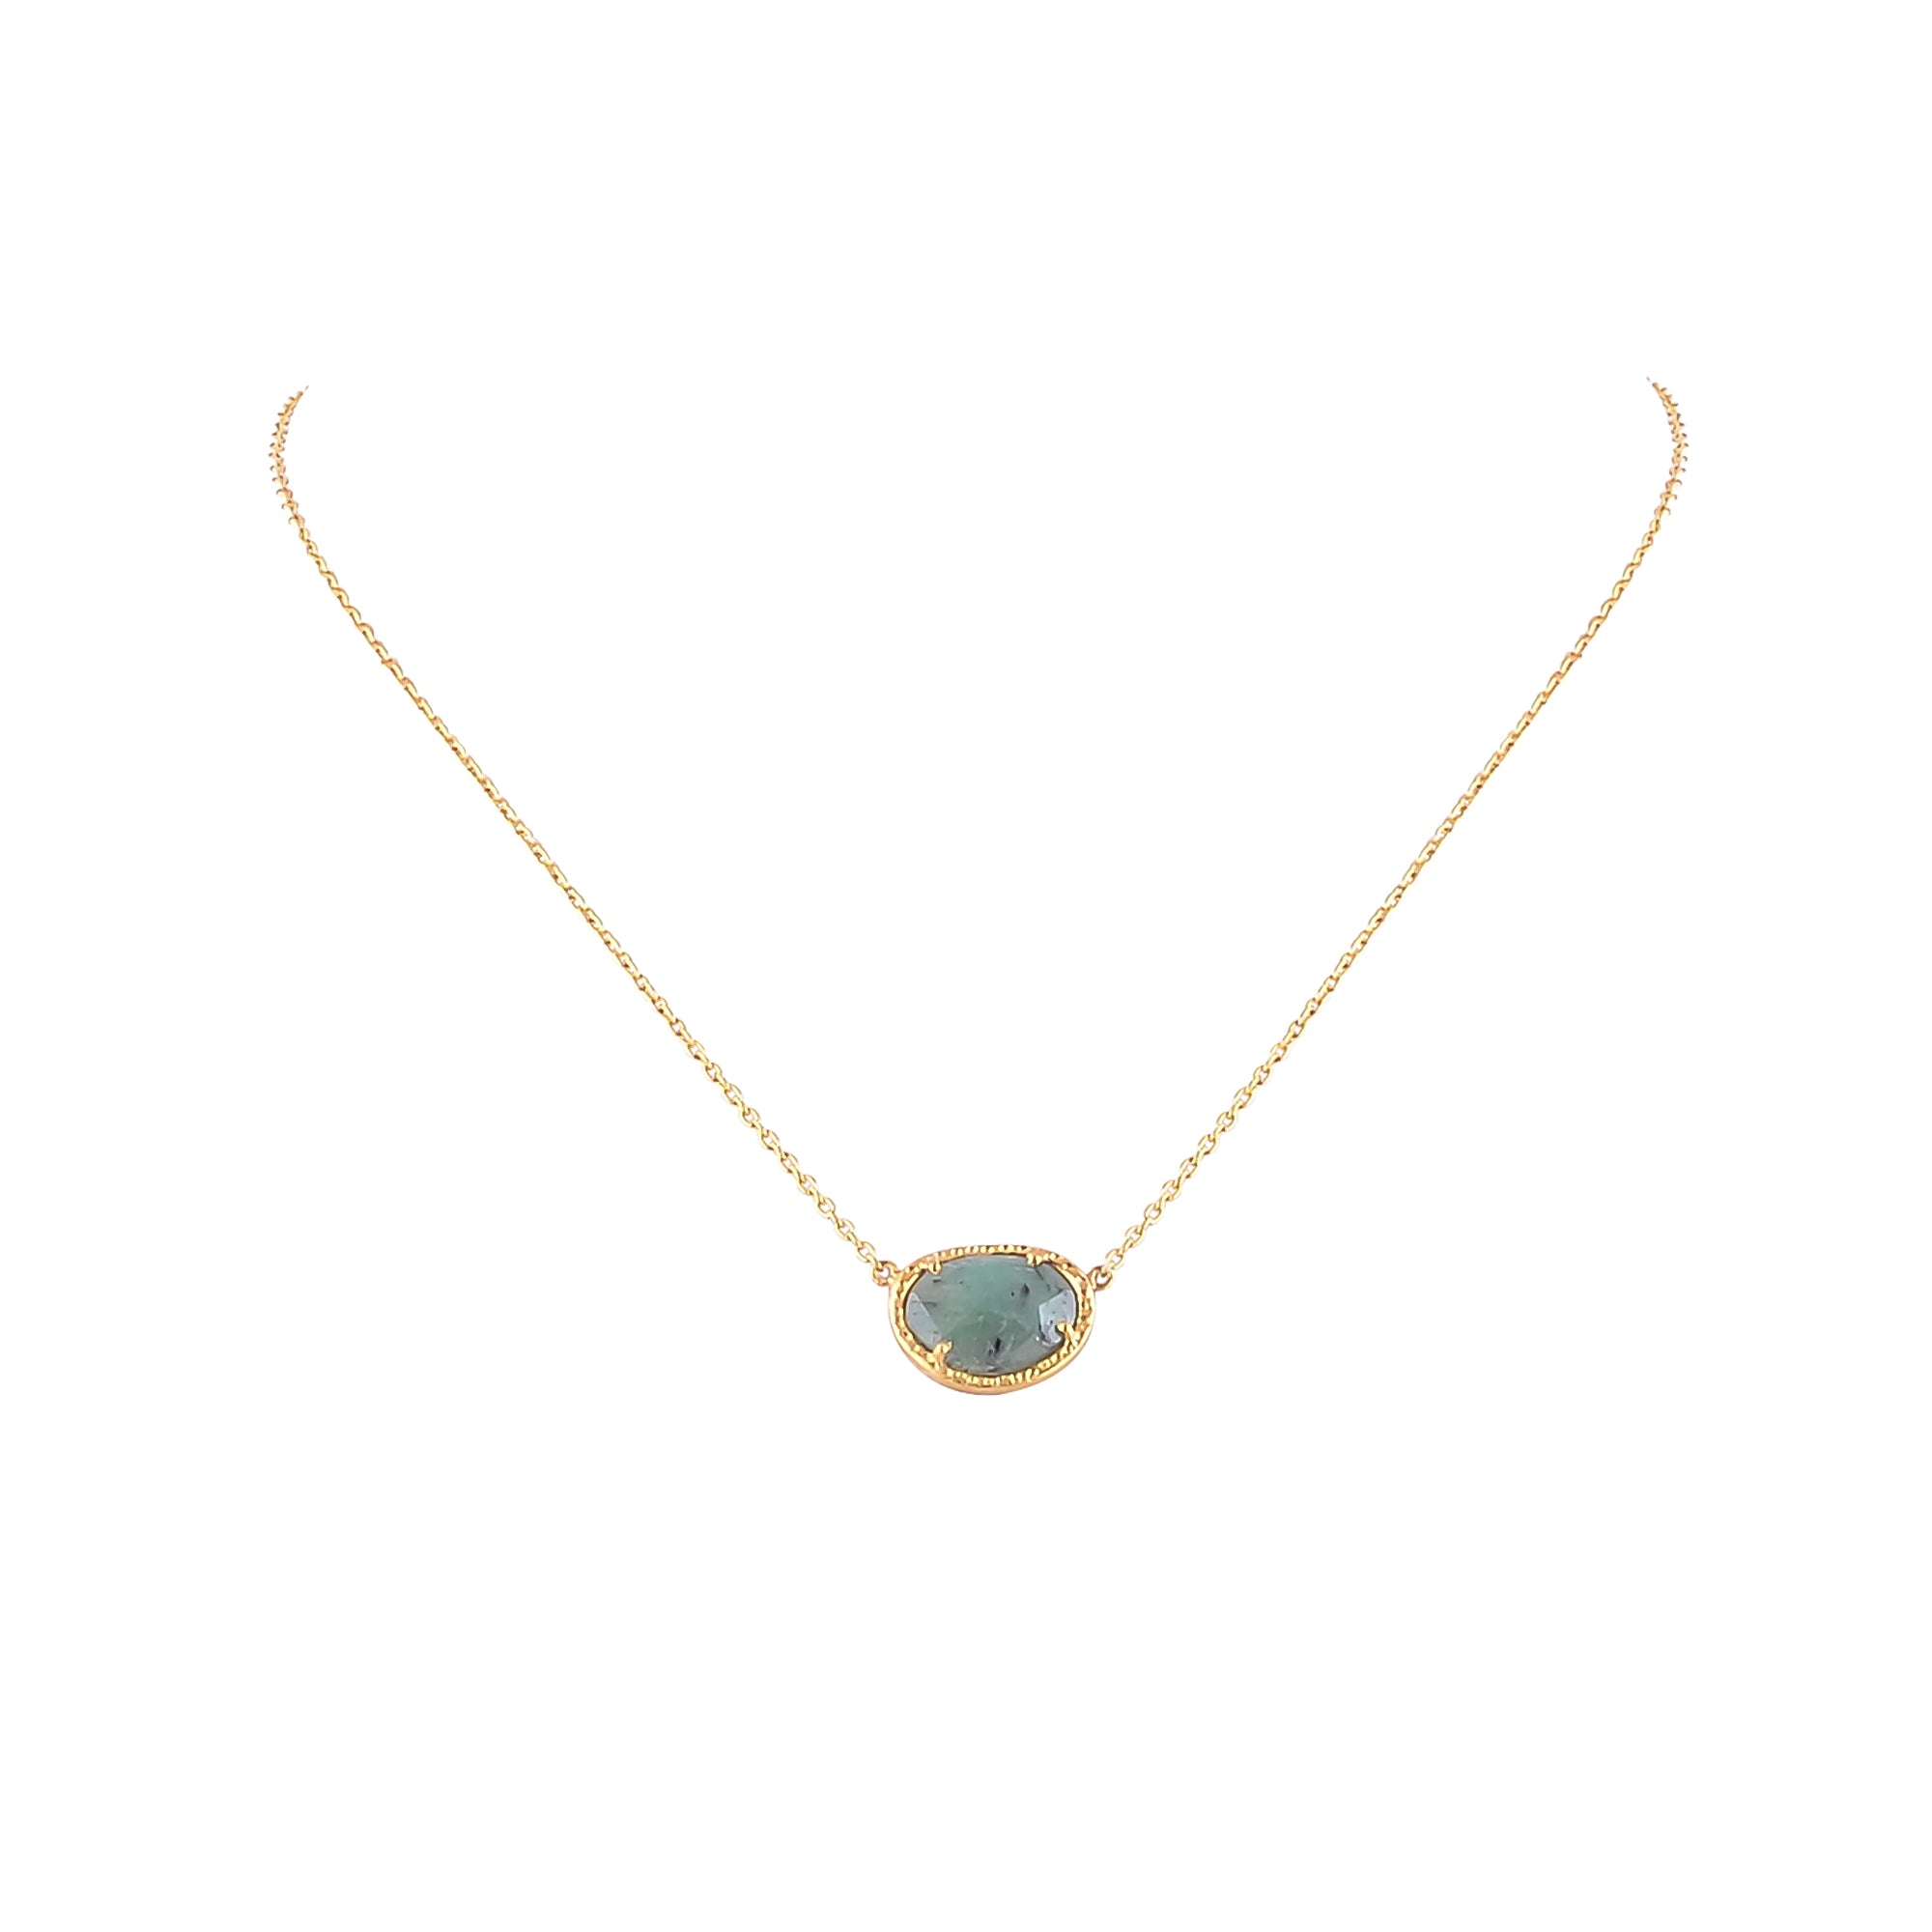 Buy Handcrafted Silver Gold Plated Emerald Necklace